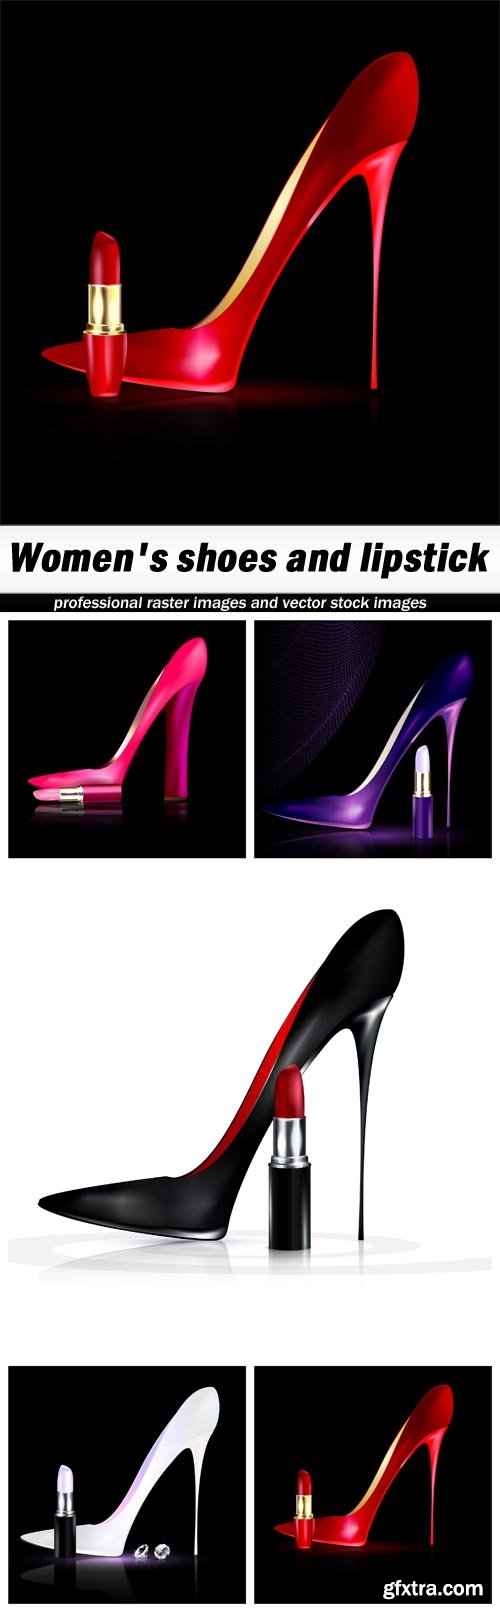 Women's shoes and lipstick - 5 EPS